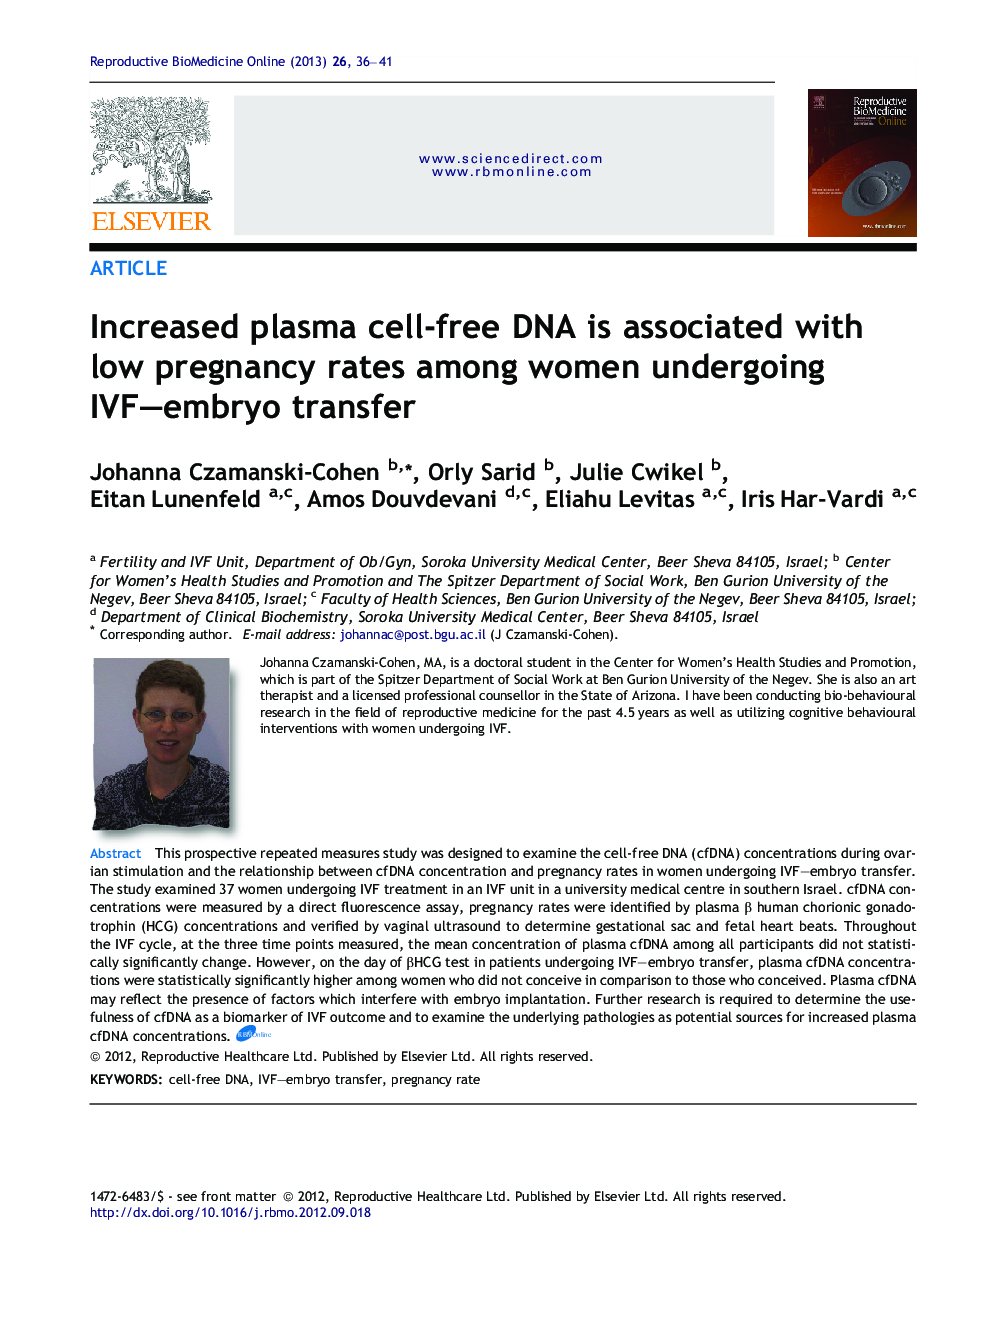 Increased plasma cell-free DNA is associated with low pregnancy rates among women undergoing IVF–embryo transfer 